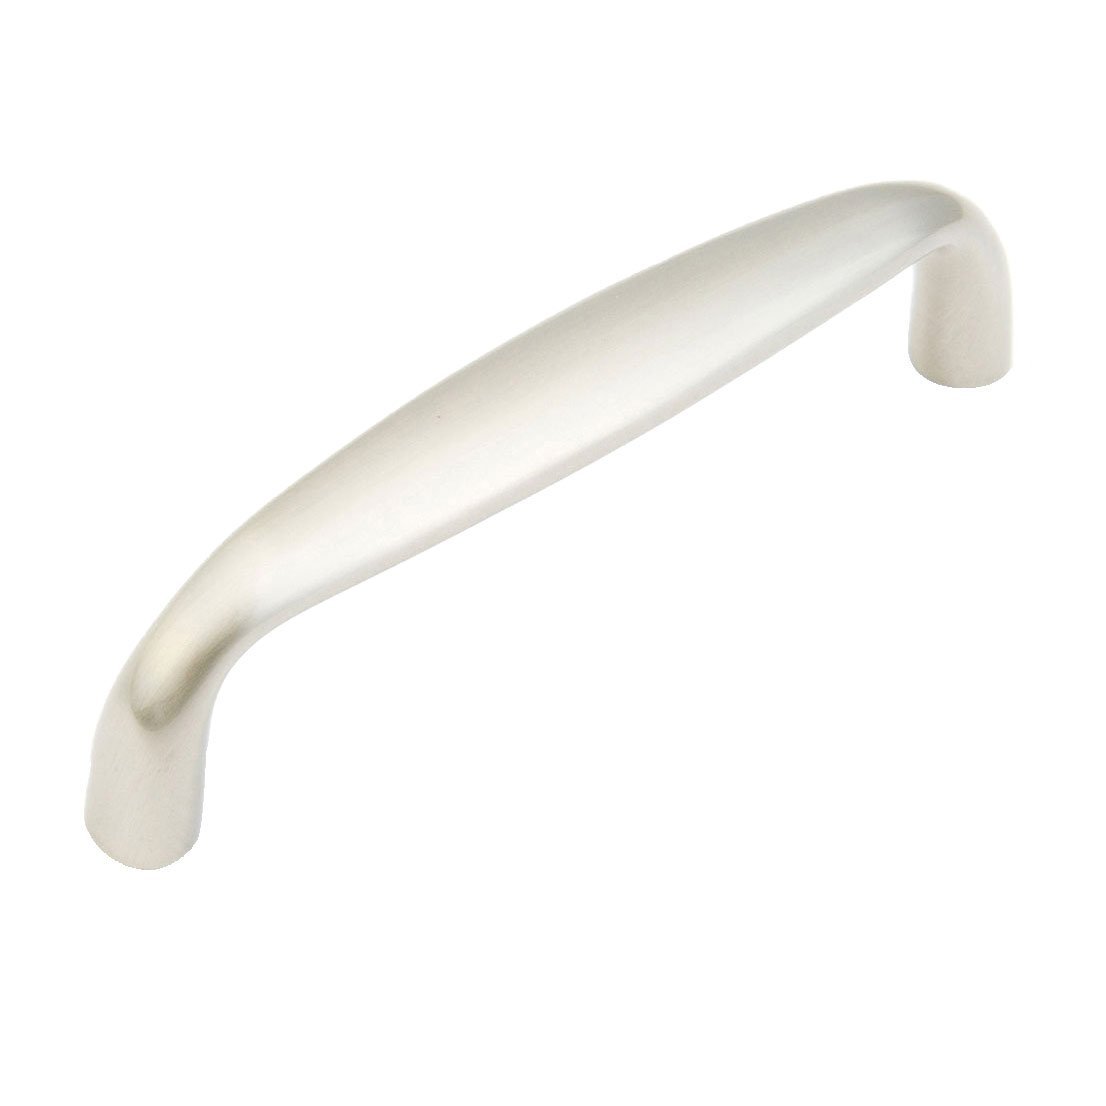 Schaub and Company 4" Tapered Handle in Satin Nickel